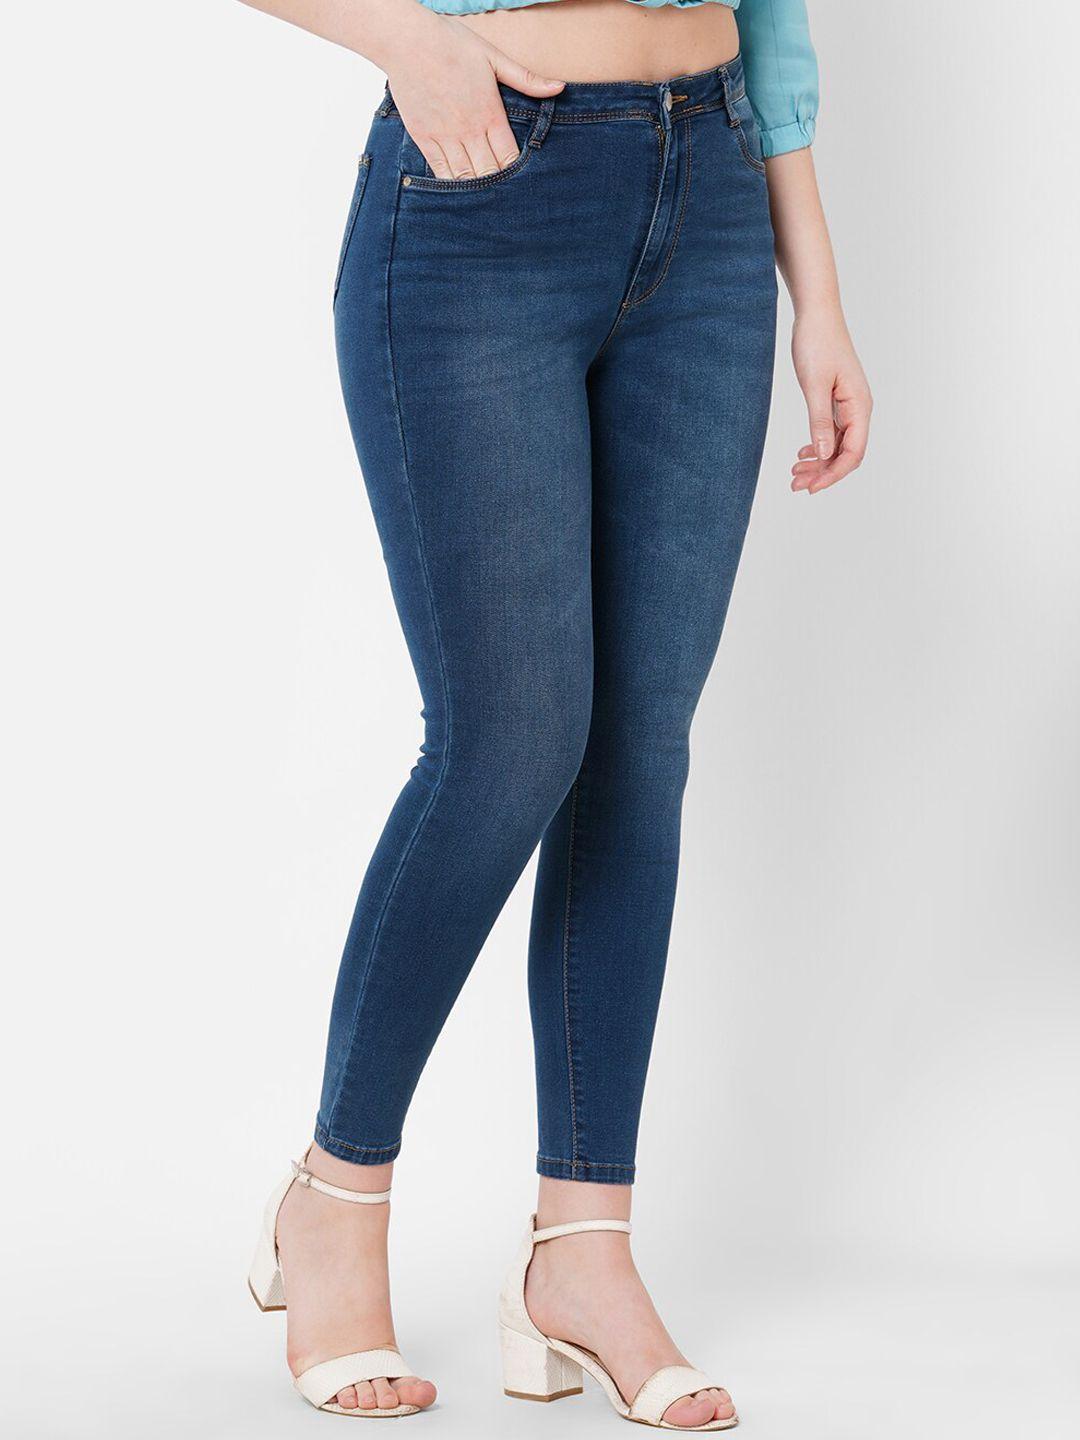 kraus-jeans-women-navy-blue-super-skinny-fit-high-rise-light-fade-stretchable-jeans